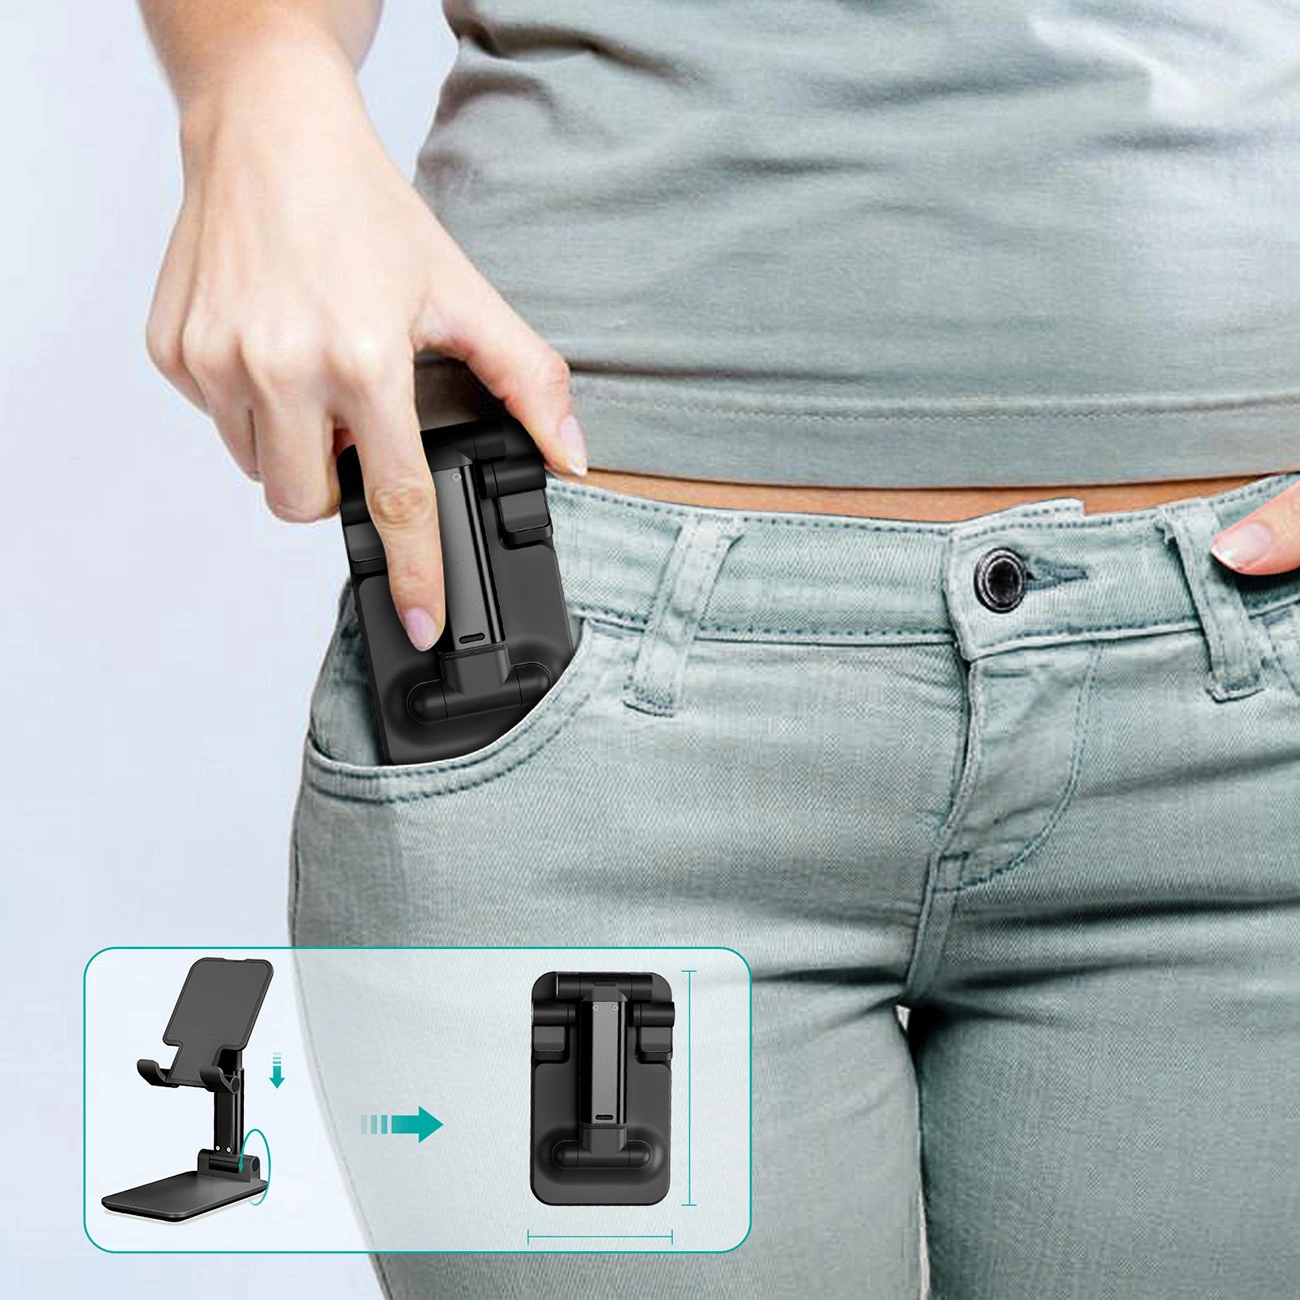 Shot of a woman putting the Choetech H8-BK stand into her pocket